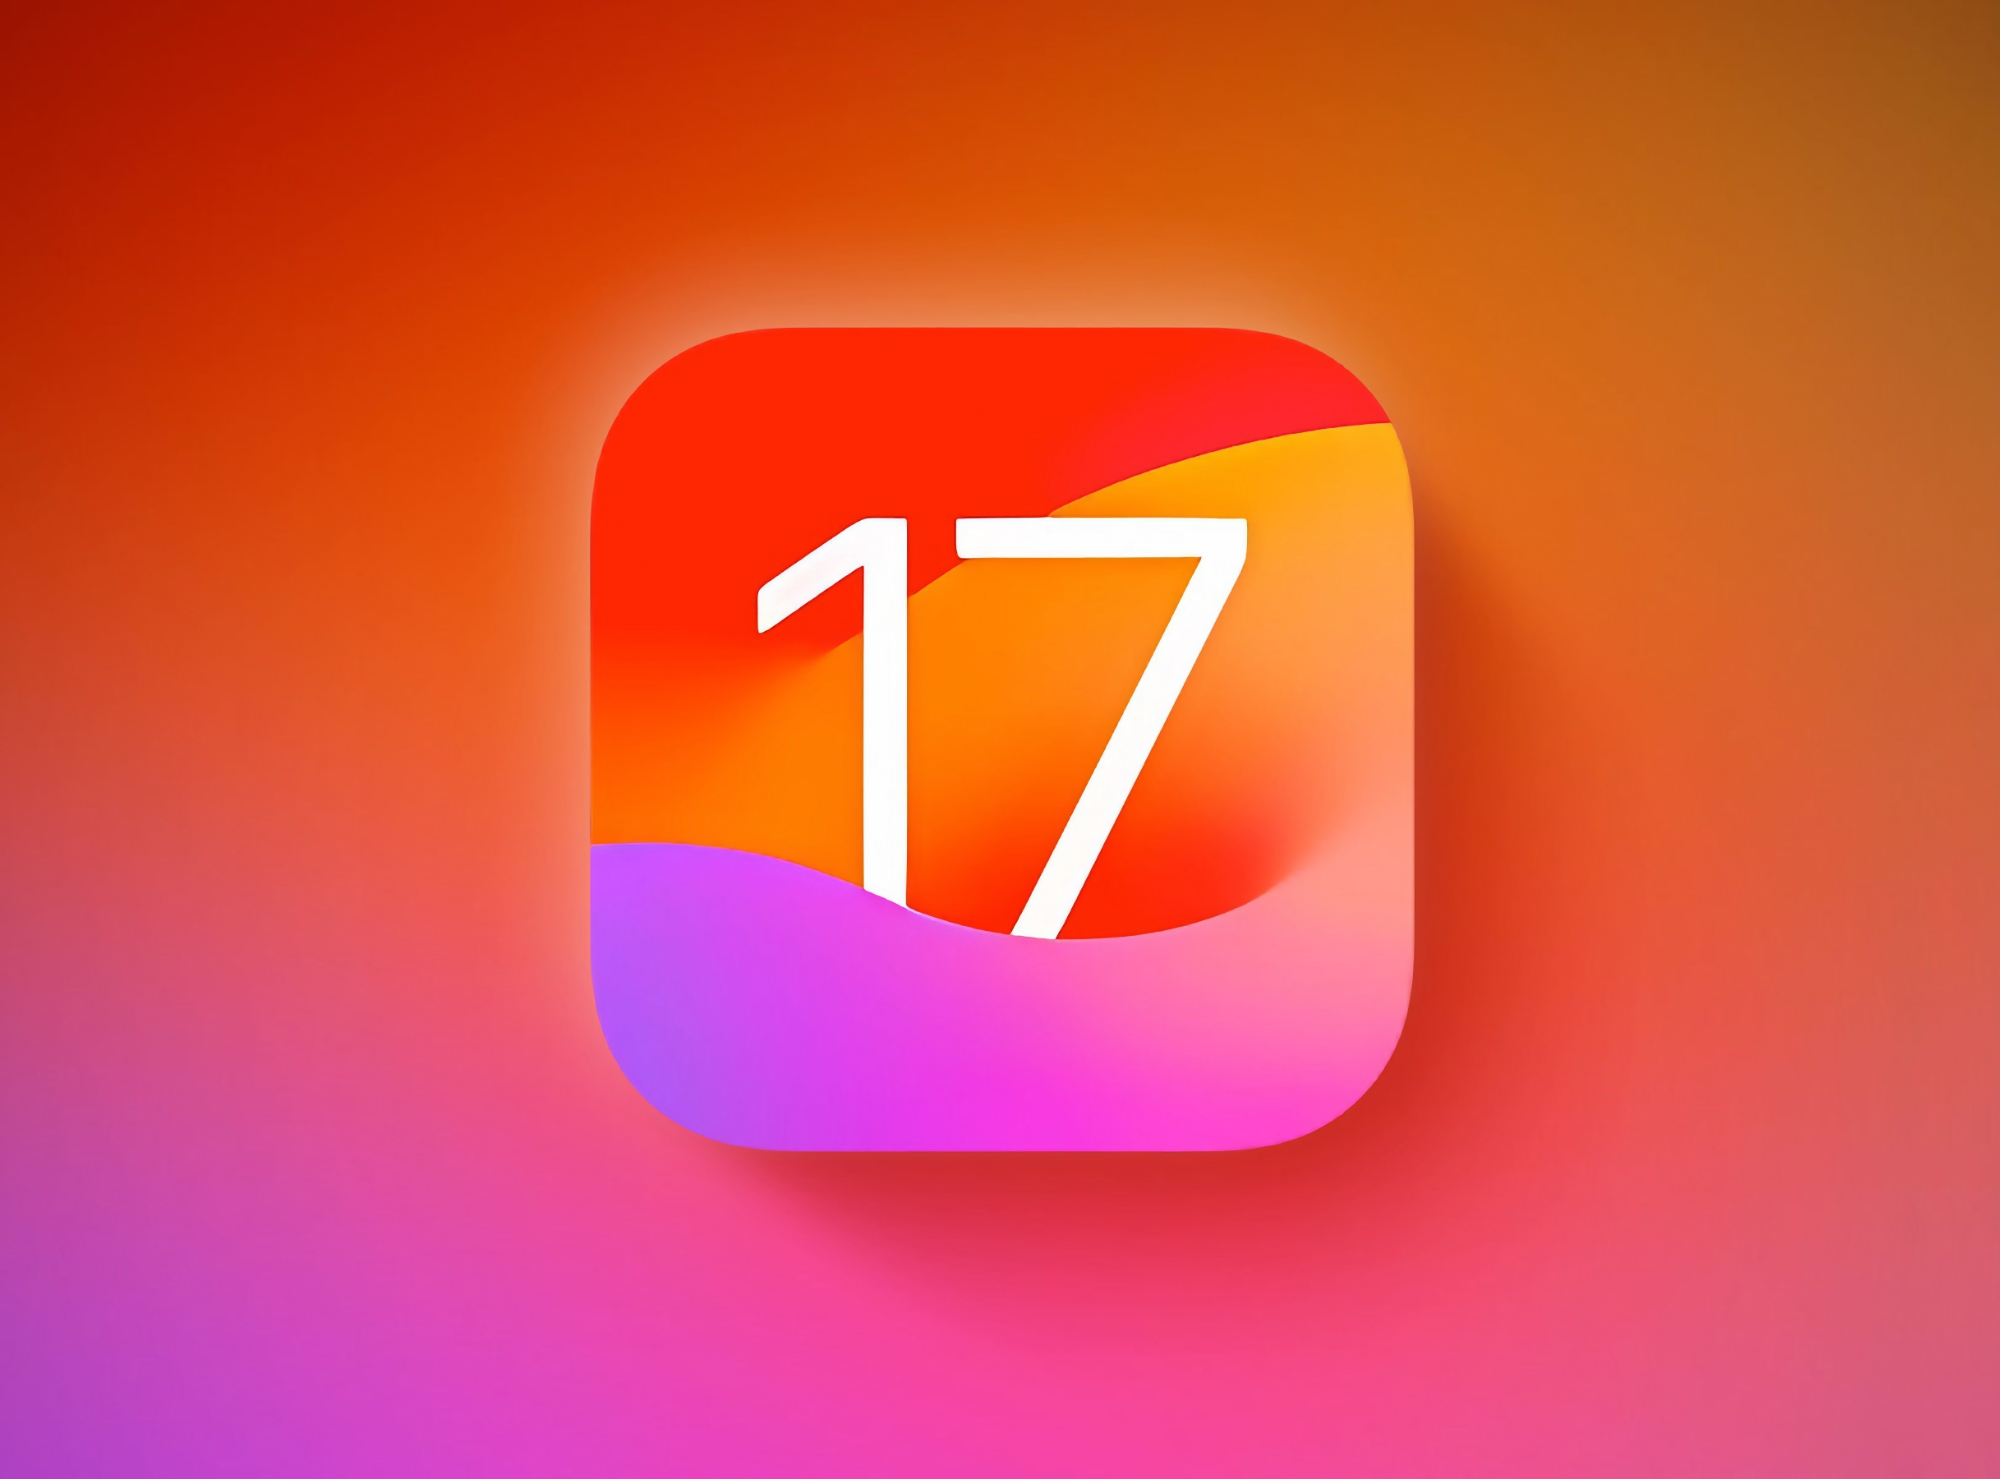 Apple has released iOS 17.0.1 and iOS 17.0.2 for iPhone users